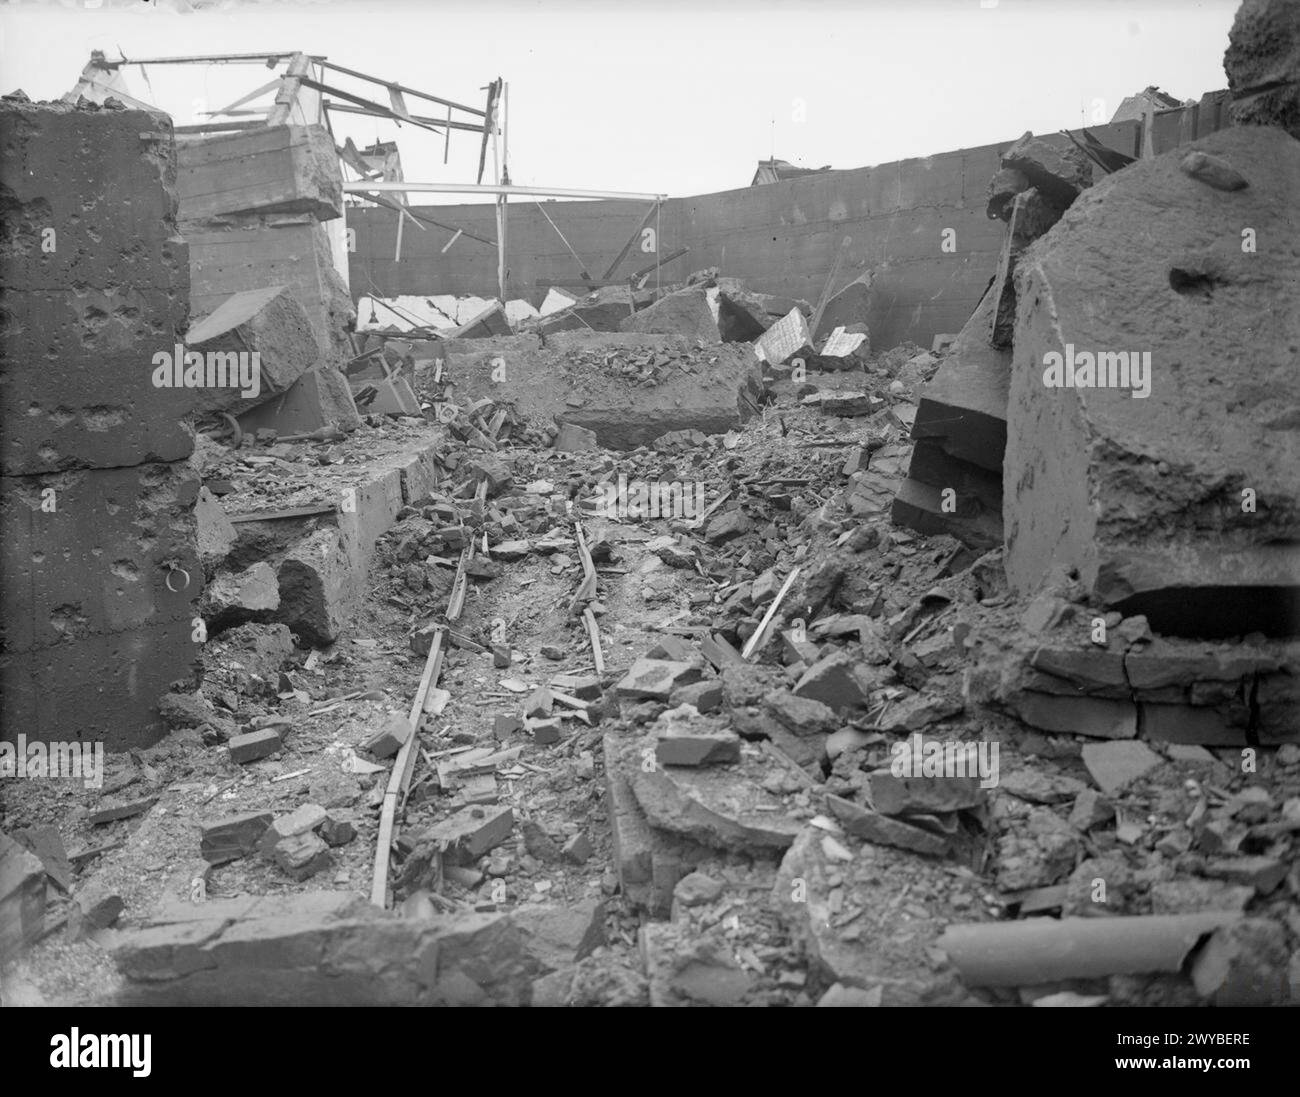 EXPLOSION AT RNAD, MARYPORT, NEAR CARLISLE. 22 JANUARY 1944 - View of the damage after the explosion. , Stock Photo